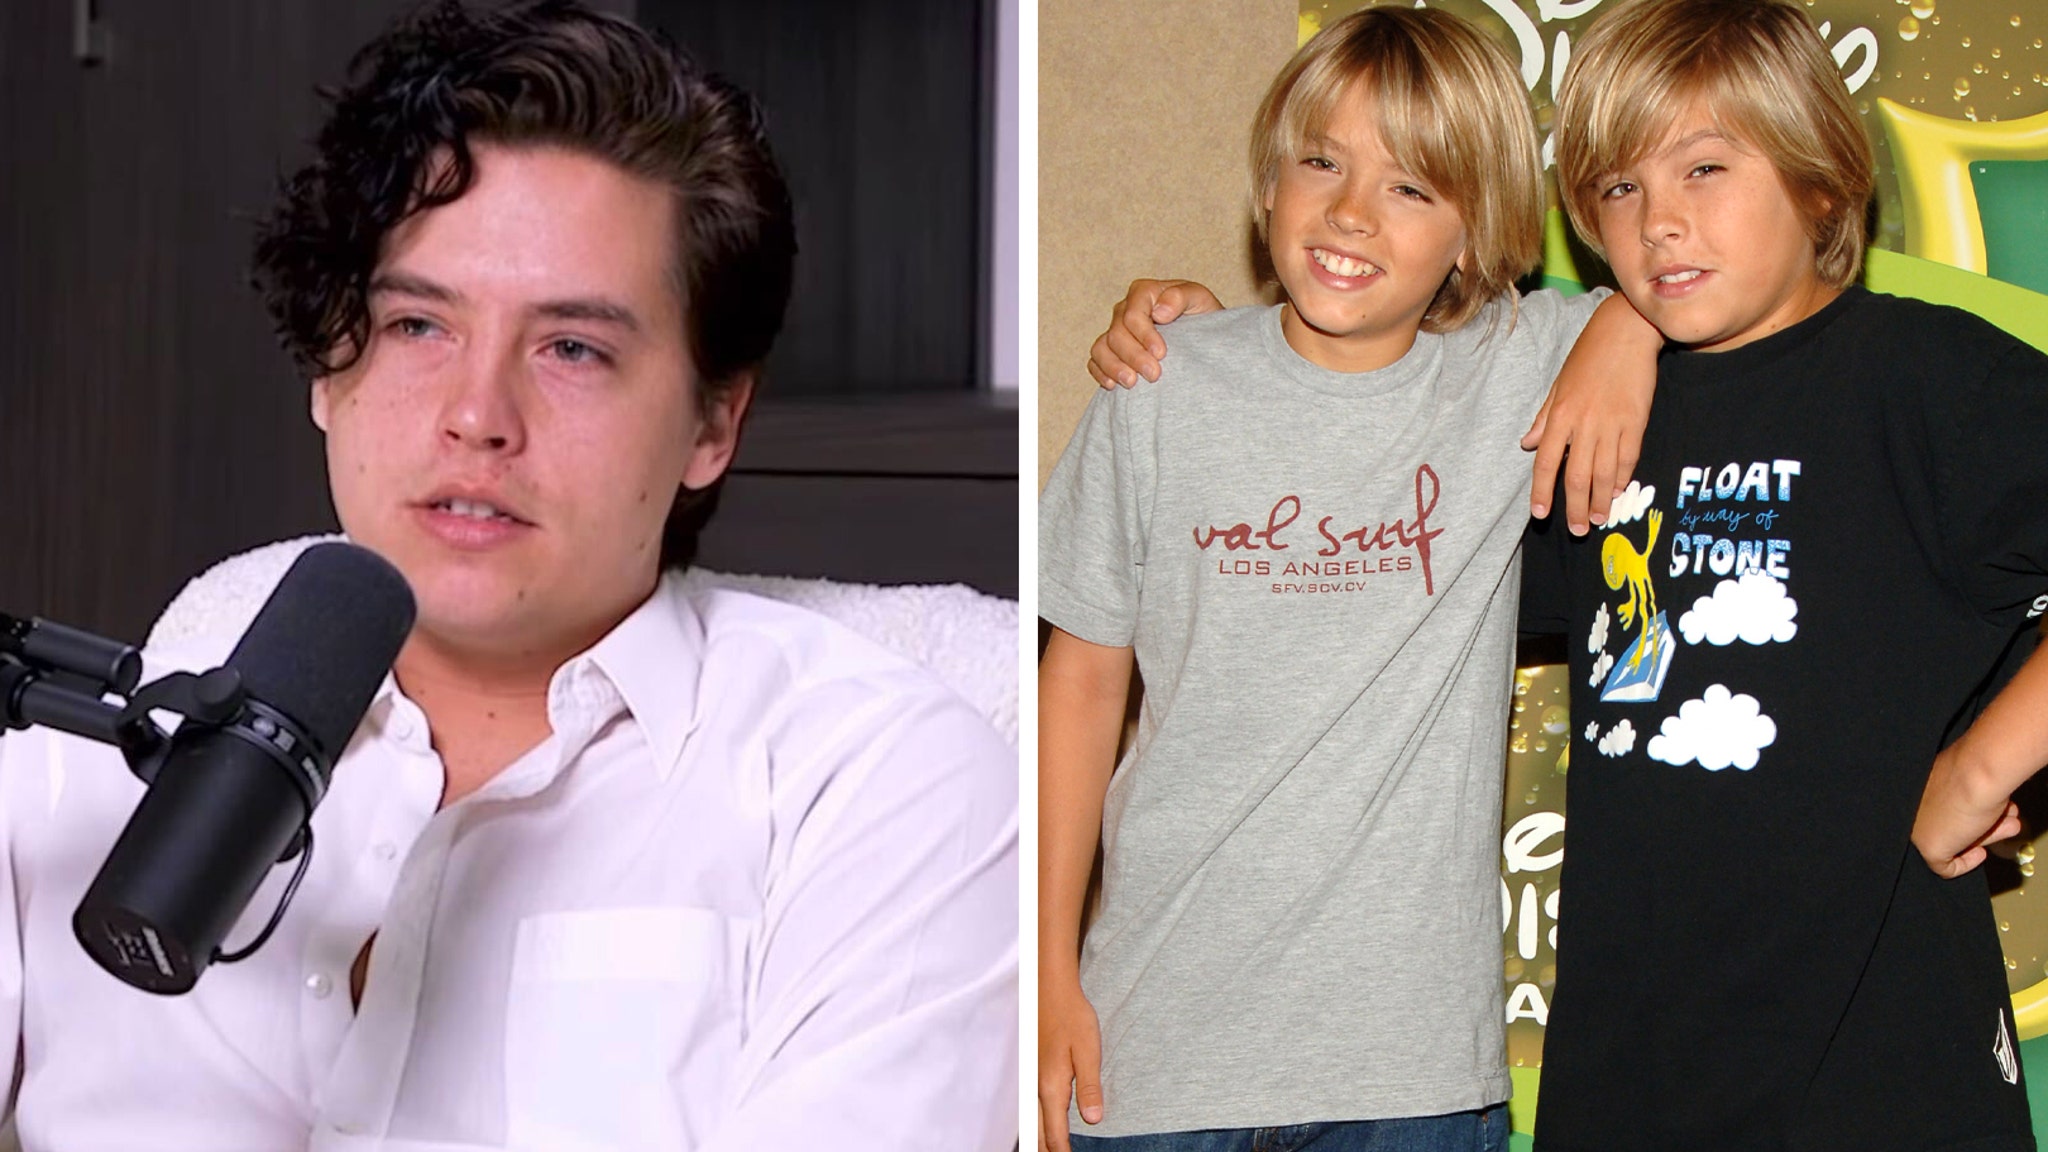 Cole Sprouse Says Mom Spent Child Acting Money: 'Most Irresponsible Person'